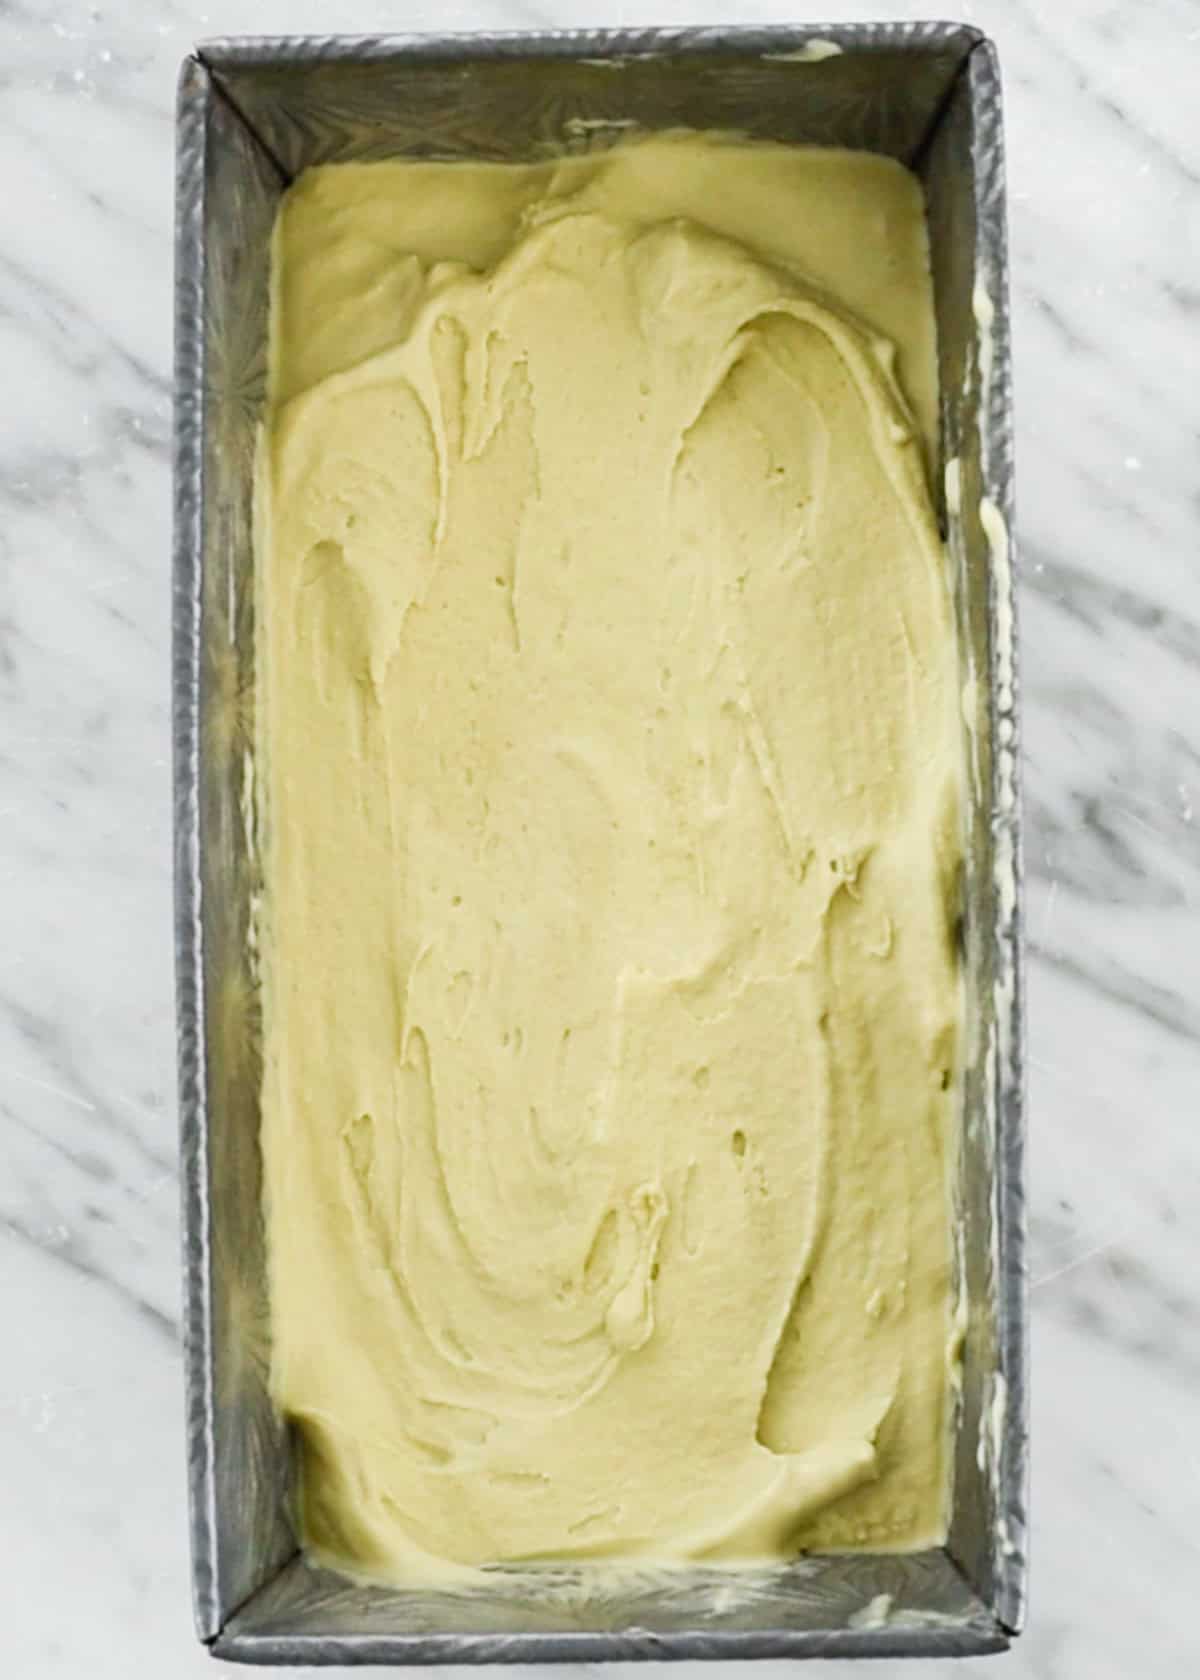 Dairy Free Matcha Ice Cream in a container before freezing